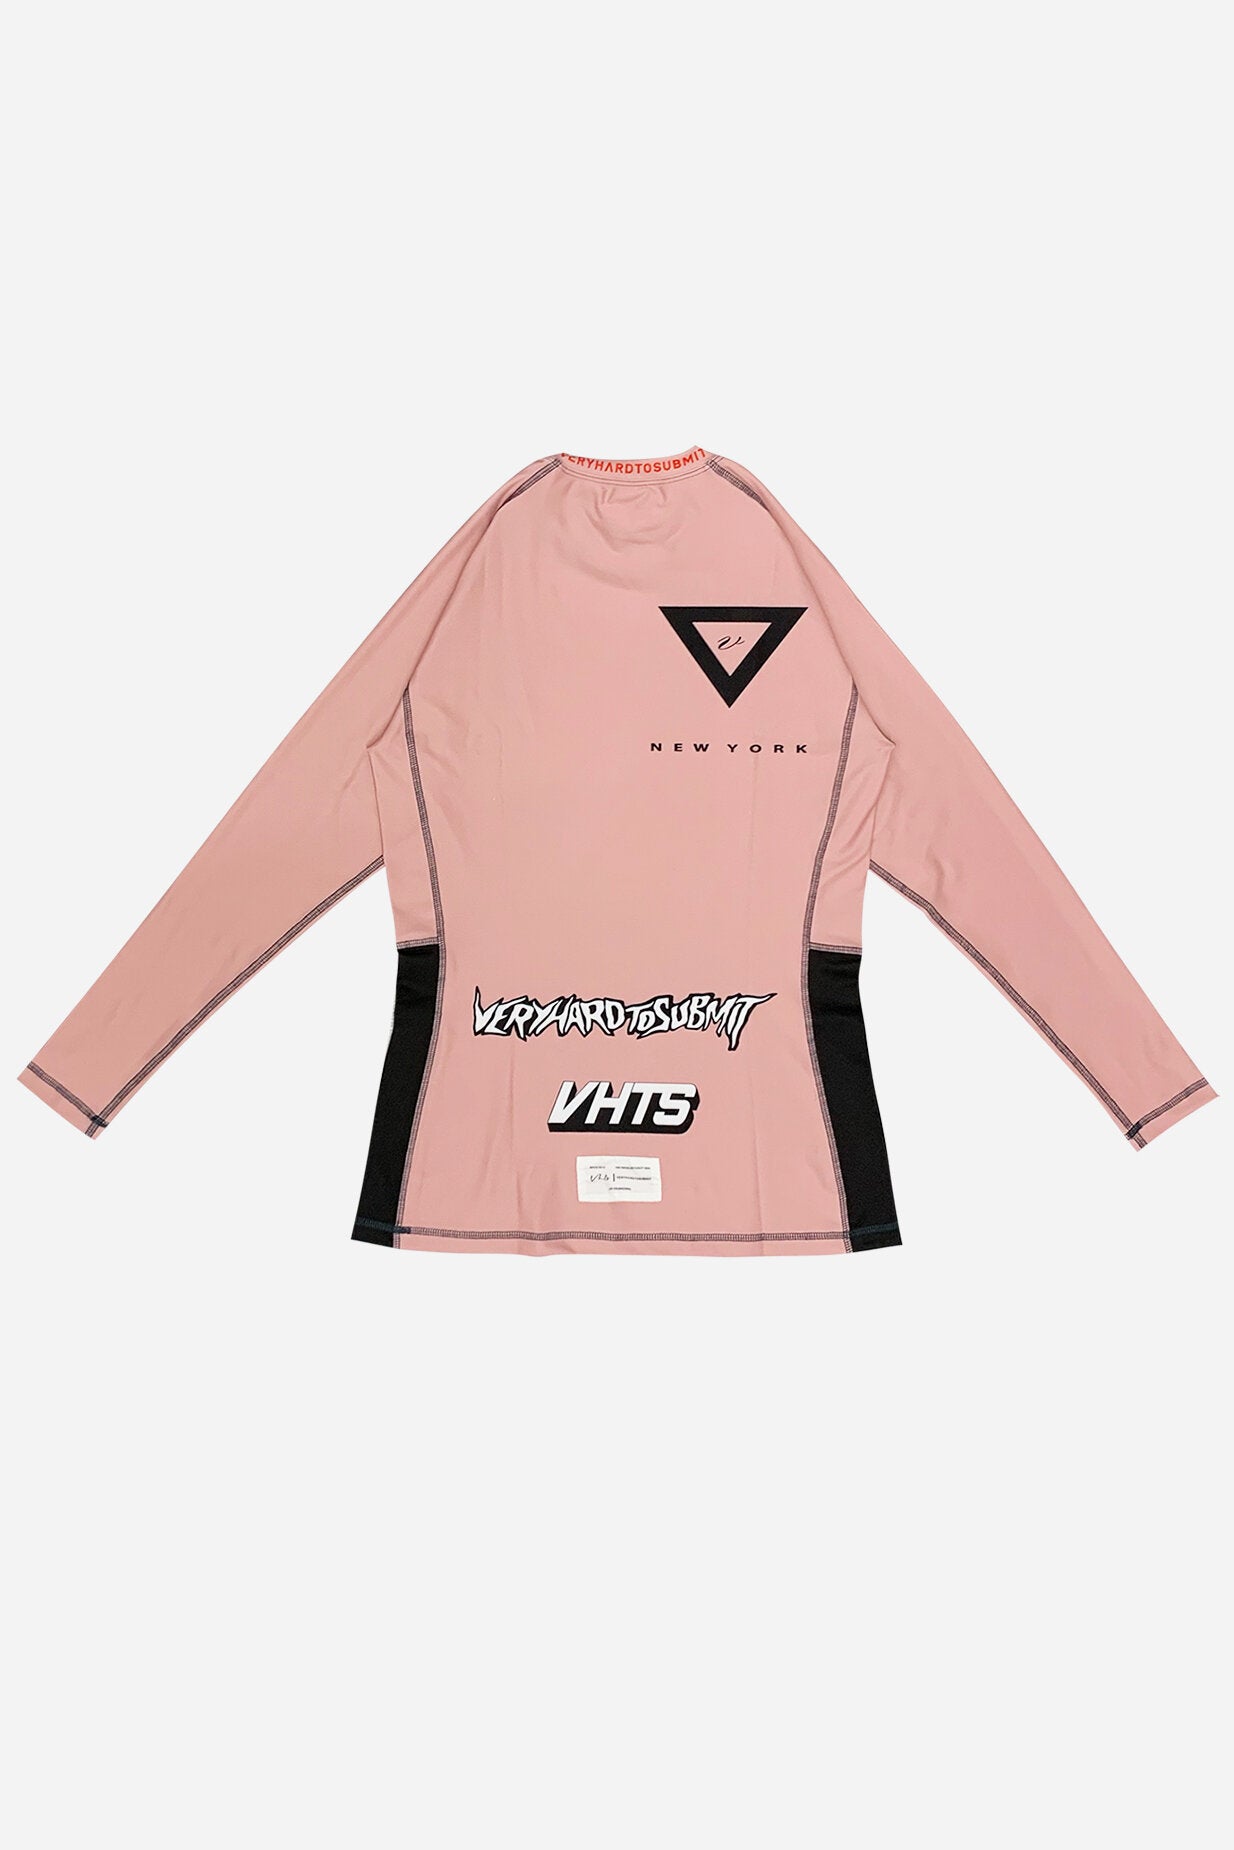 Pink (Female fitting) Long sleeves Rash Guard8 0% Polyester x 20% lycra   side mesh panel ventilation system  contrast stitching  sublimation printing  Female body type fitting vhts europe